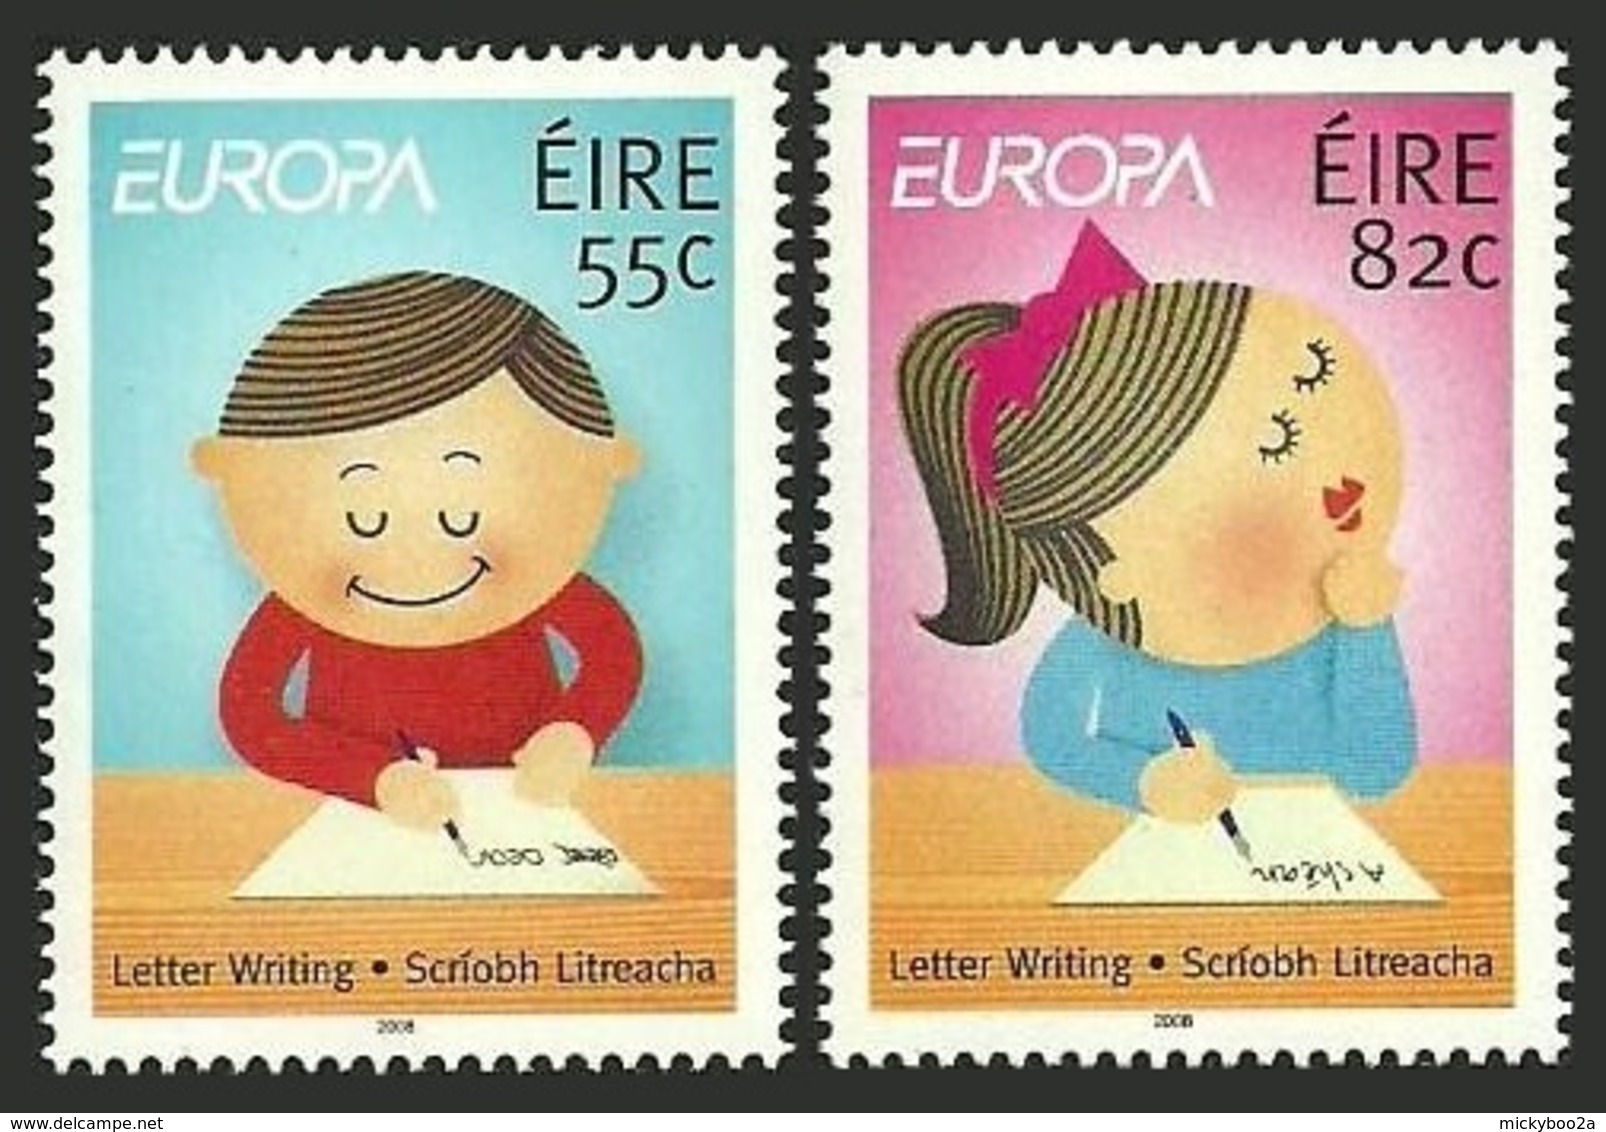 IRELAND 2008 EUROPA THE LETTER ANIMATION CARTOONS CHILDREN SET MNH - Unused Stamps